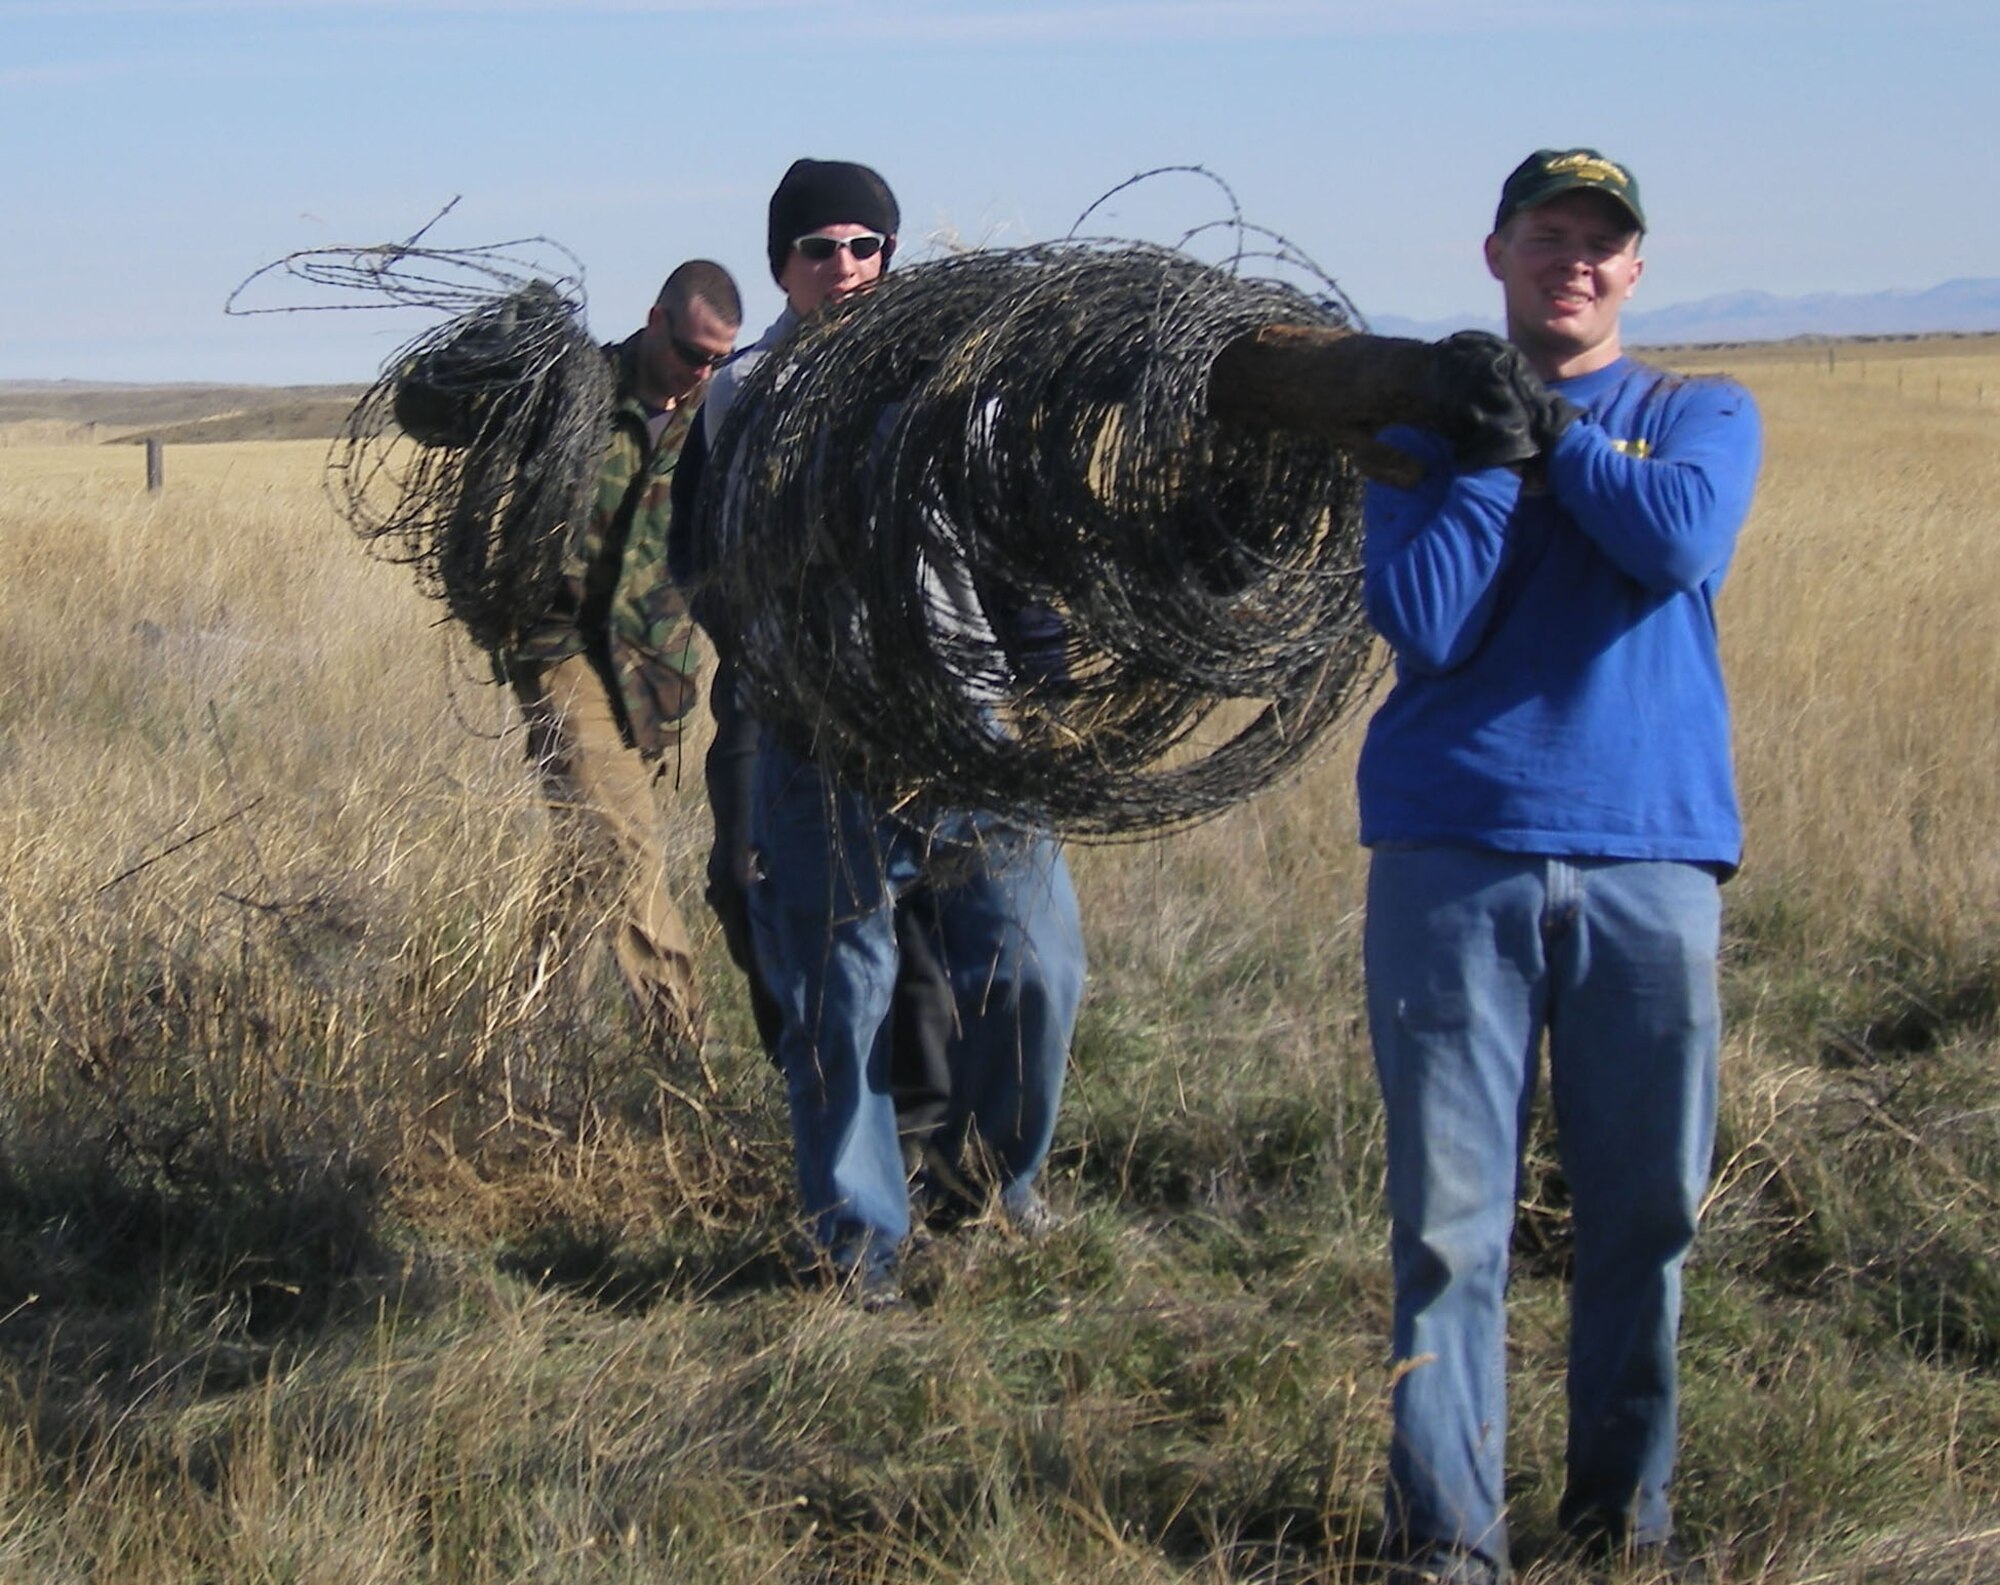 Members of the 341st Security Forces Group team up to tear down and remove unwanted fencing on Bureau of Land Management property near Fort Benton. For this, and otehr volunteer efforts by the SFG Airmen, the BLM nominated them for a national award, which they won. (Courtesy photo)